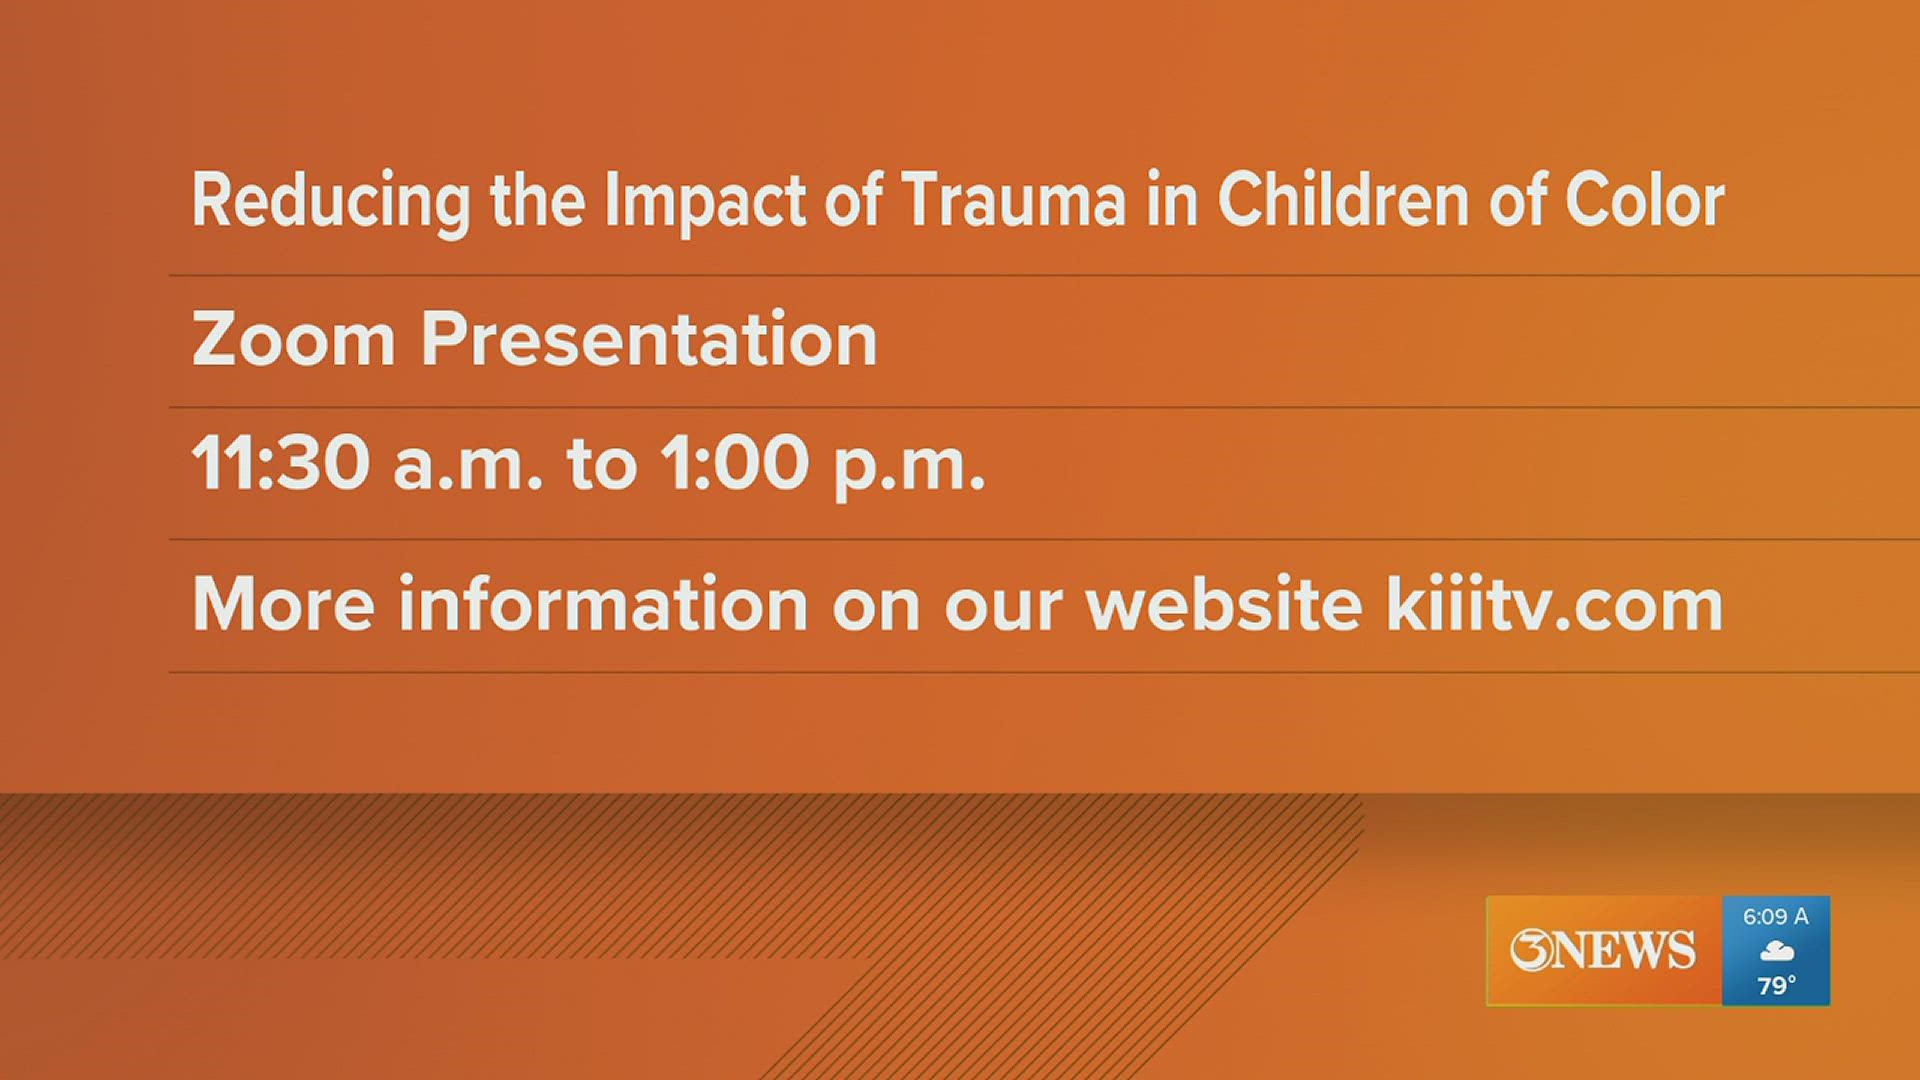 You can join a zoom presentation where participants will discuss decreasing the impact of trauma in children of color.